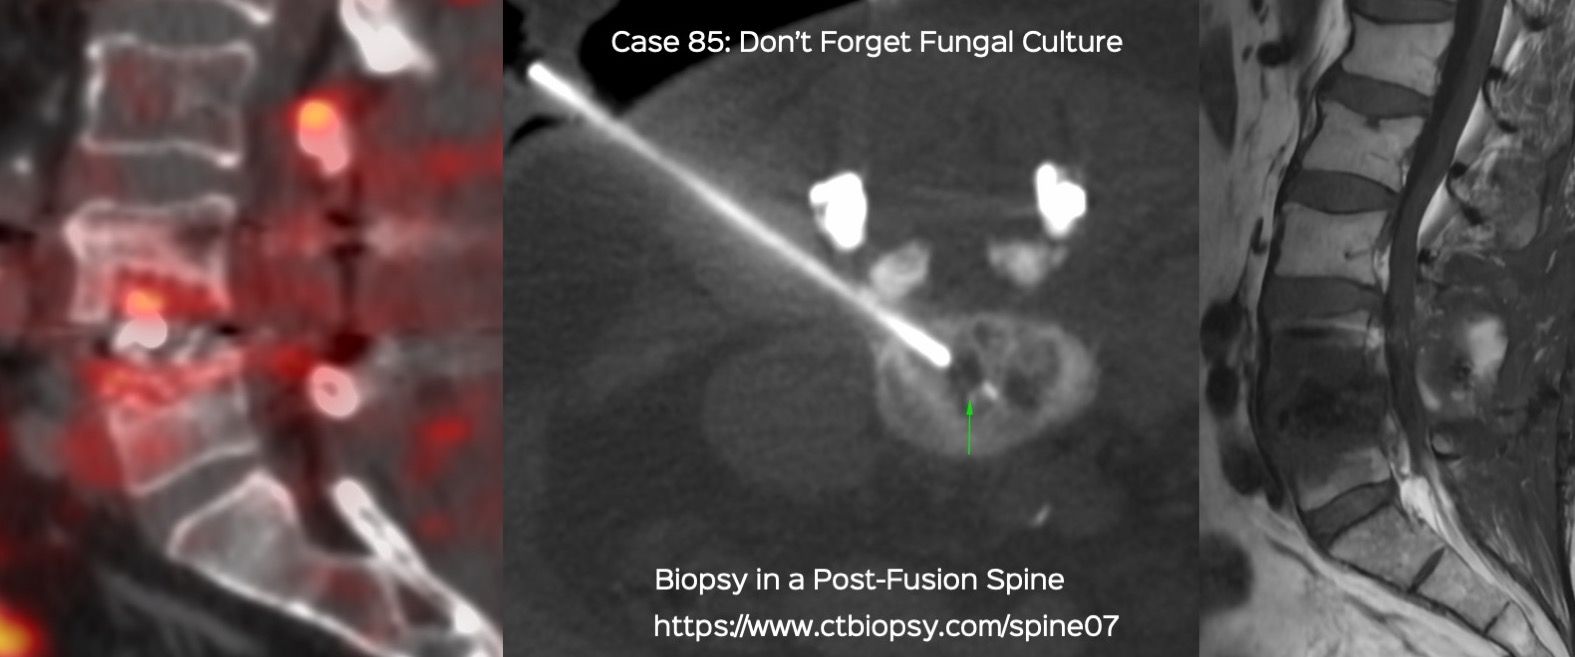 Case 85: Don't Forget Fungal Culture - Biopsy of a Post-Fusion Surgery Spine